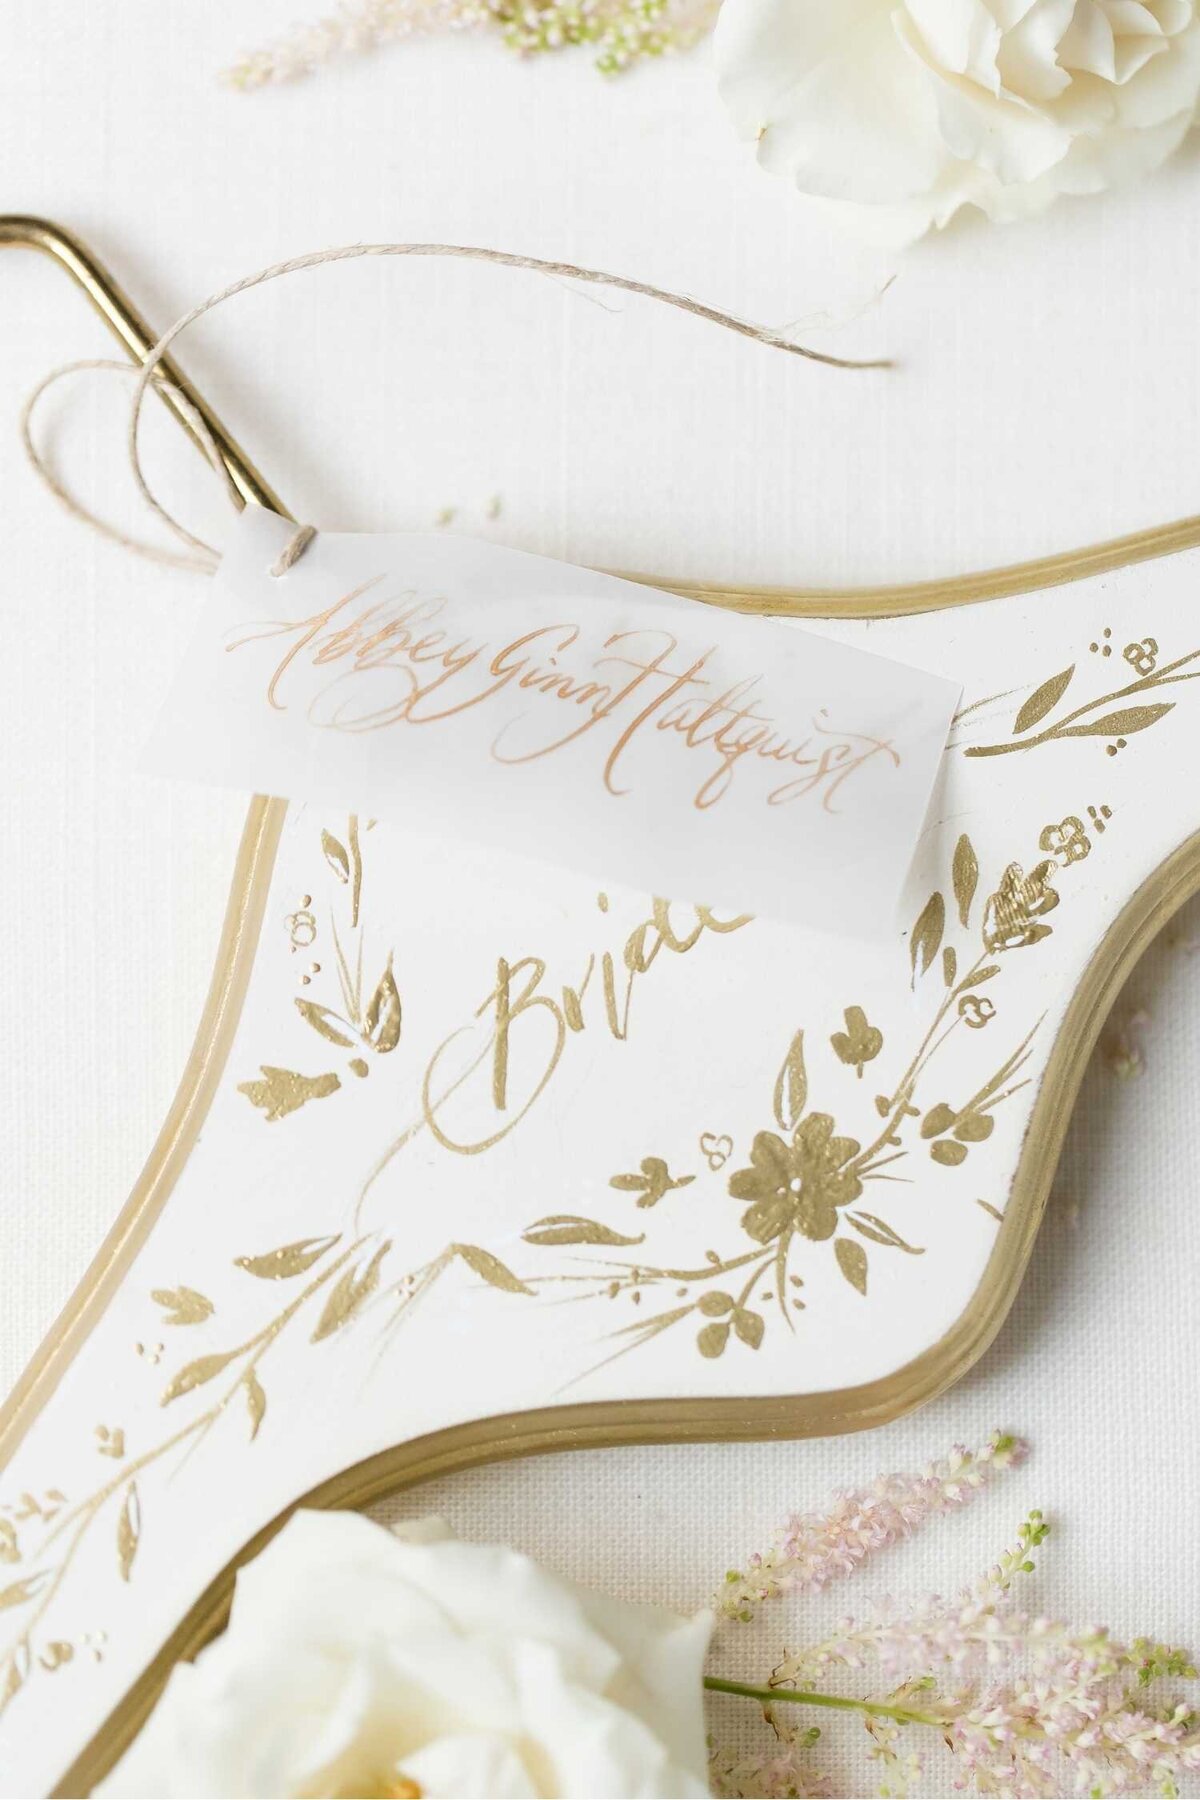 Hand Painted Gold and White Bridal Wedding Dress Hanger with Calligraphy tag at Luxury Chicago Outdoor Historic Wedding Venue  Ambassador Hotel